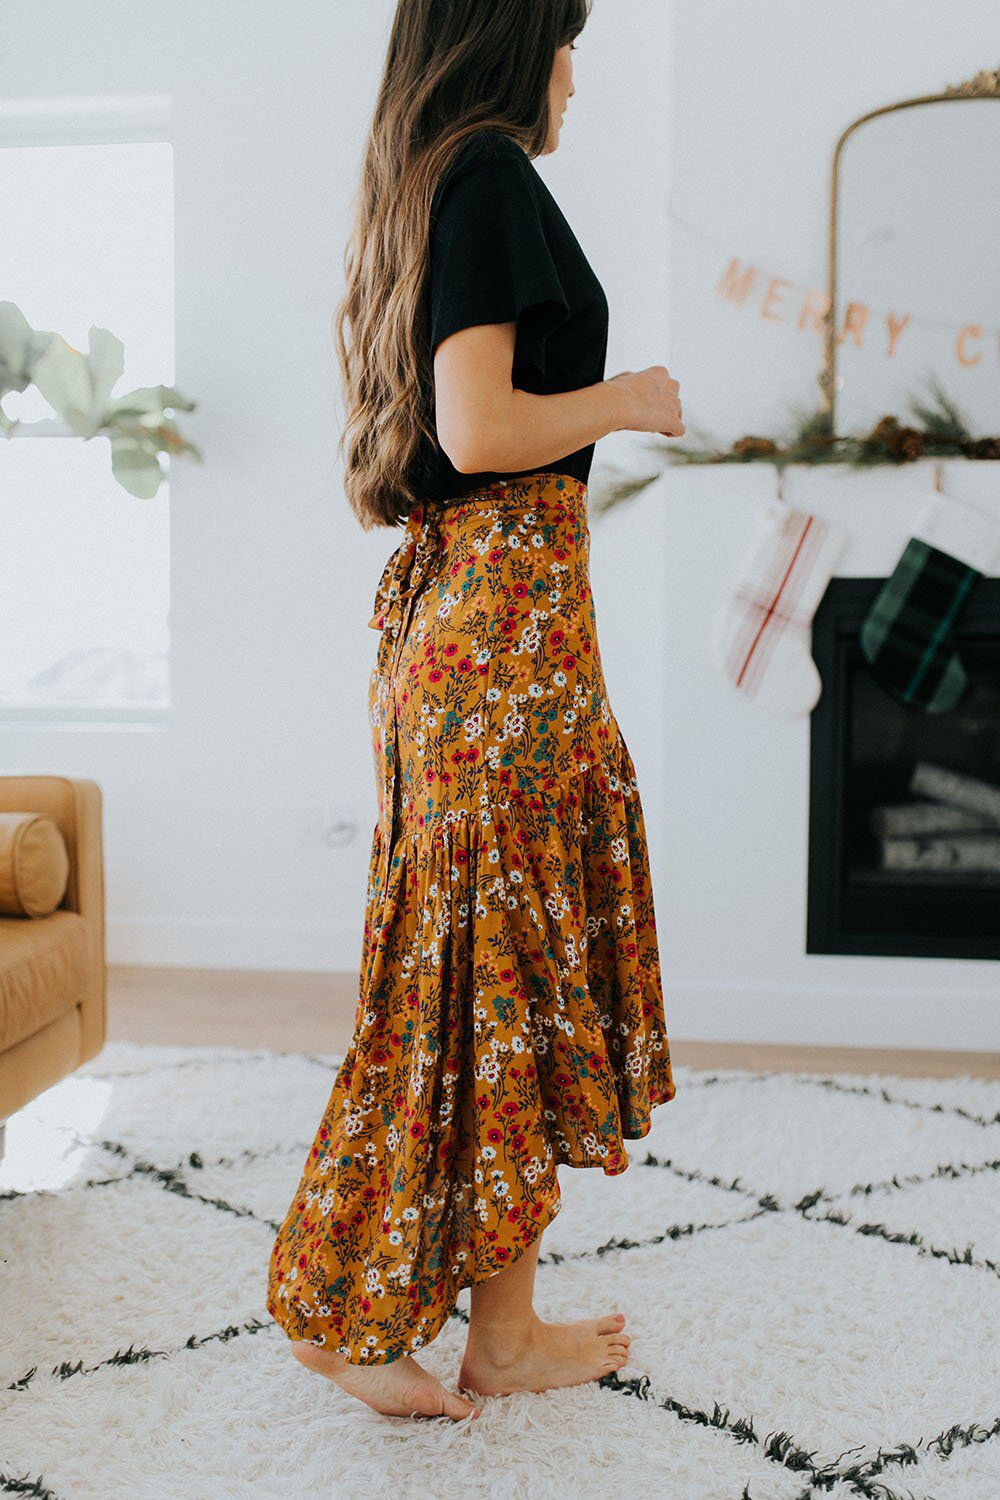 Outfit Ideas For Church, Casual wear, Floral Skirt: Long Skirt,  Floral Skirt,  Fashion week,  Church Outfit,  Casual Outfits,  Sunday Church Outfit  